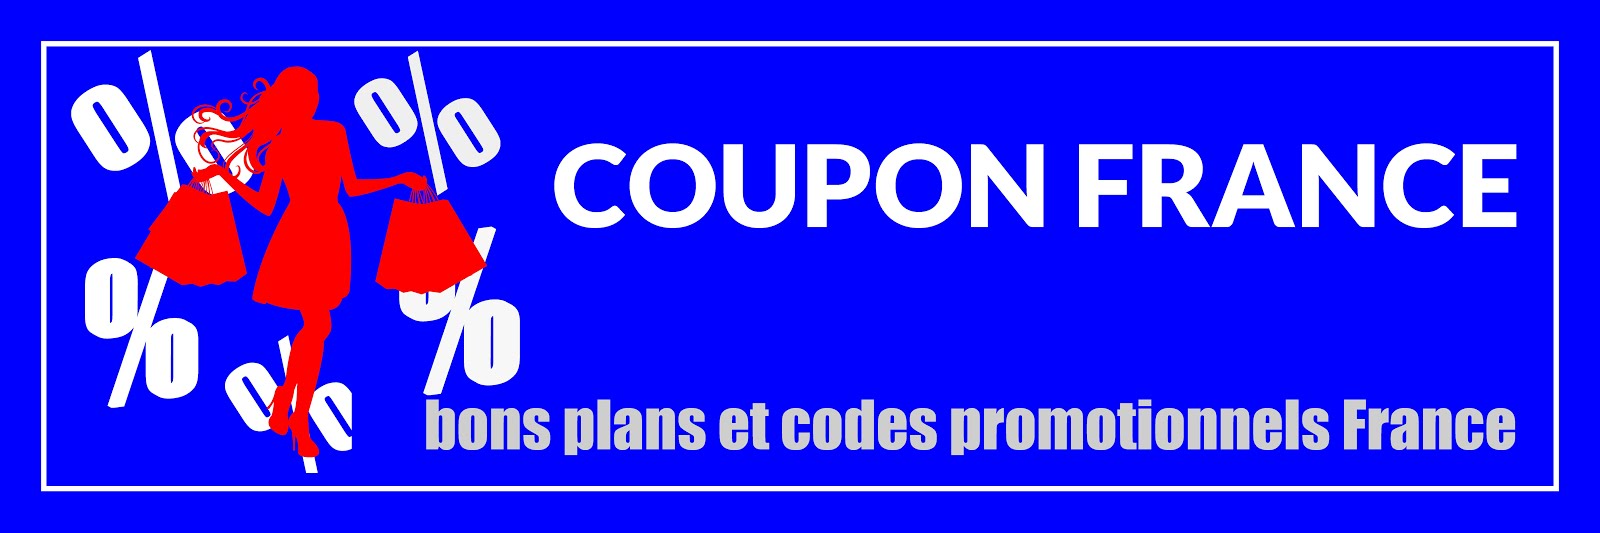 Coupon France